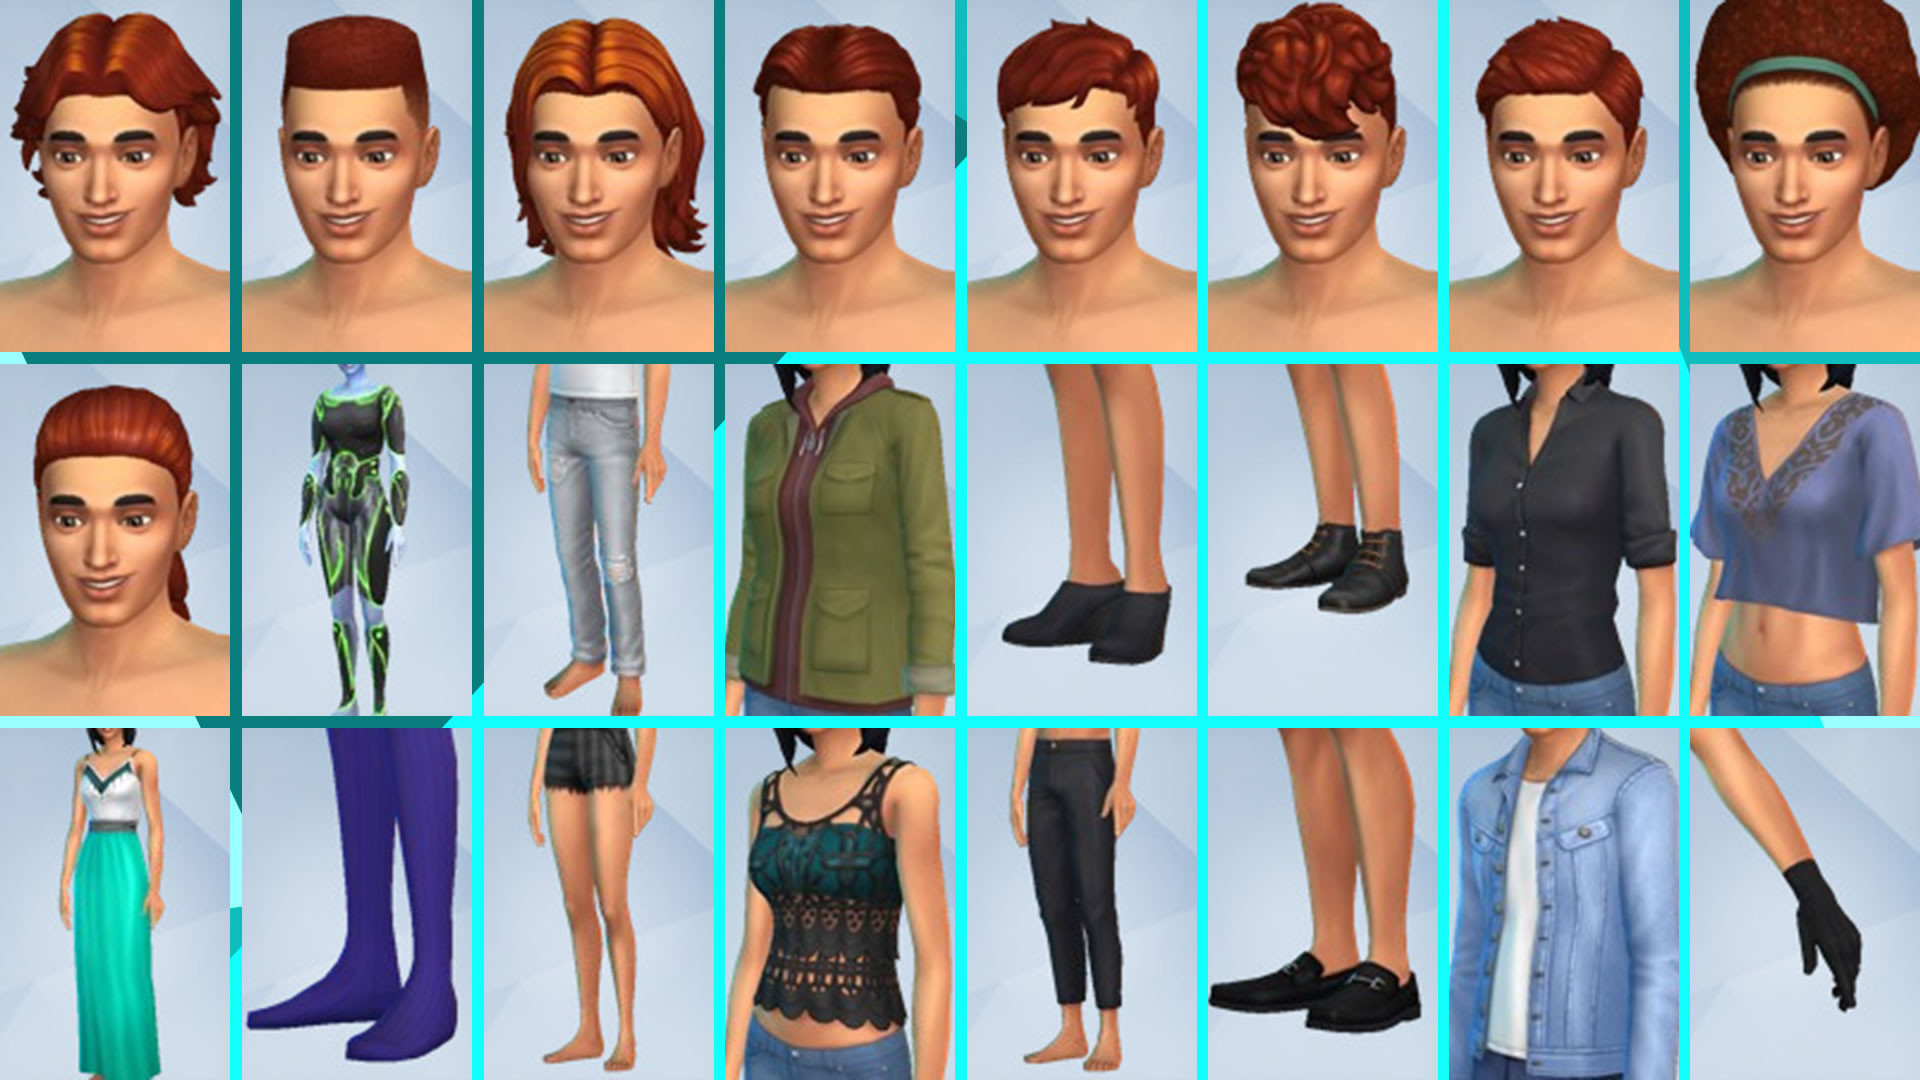 the sims 4 get to work cheap